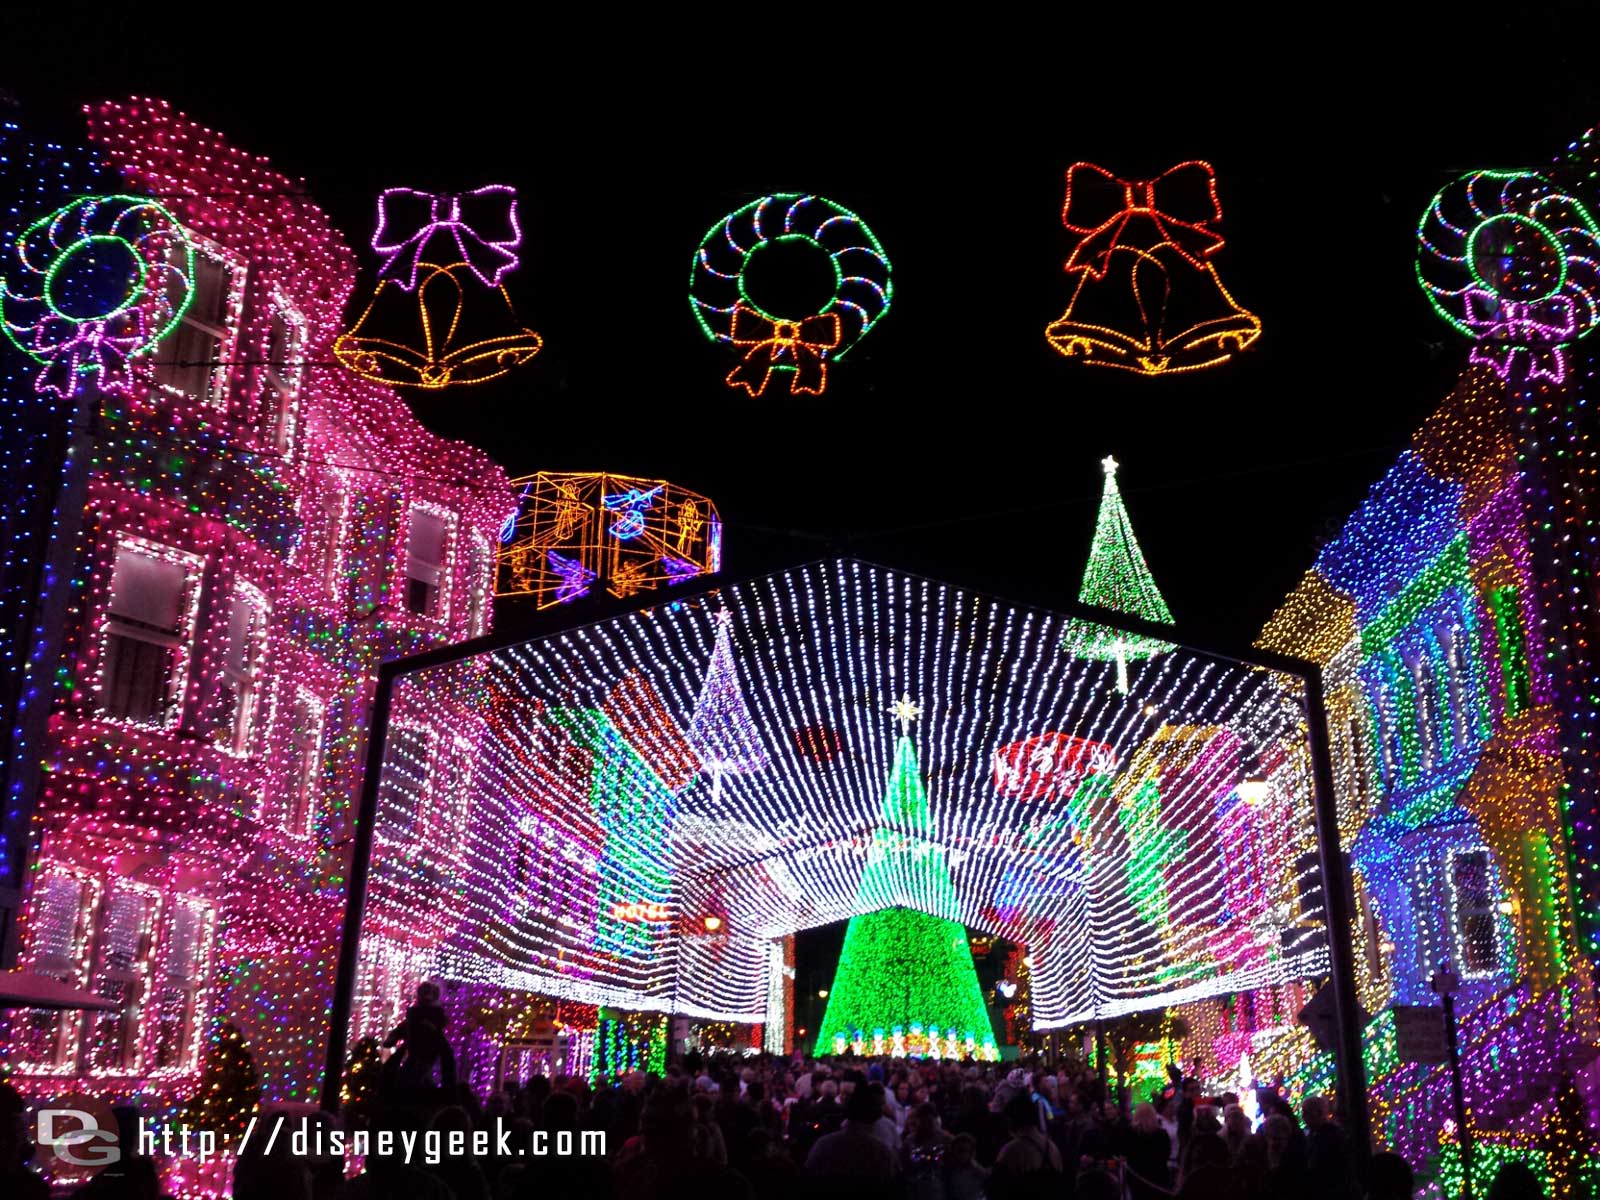 The Osborne Family Spectacle of Dancing Lights at Disney's Hollywood Studios.